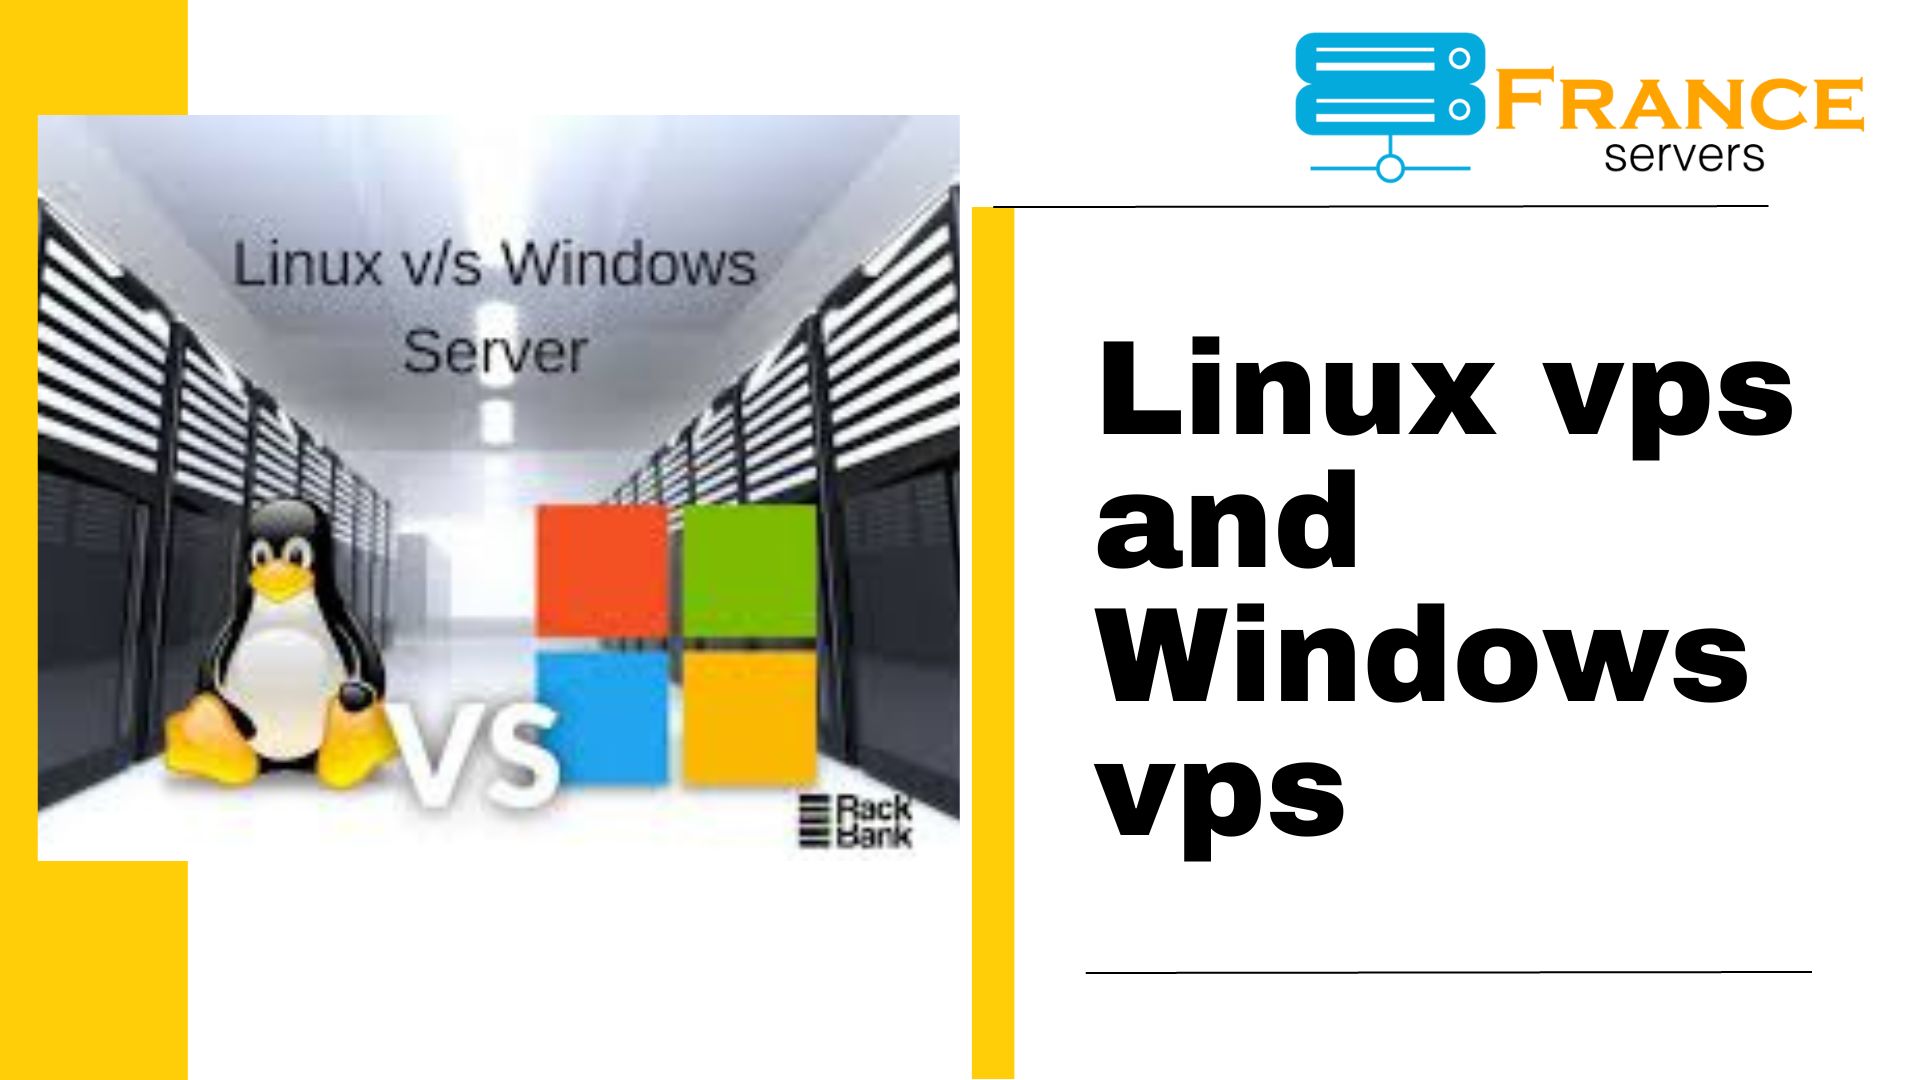 Linux vps and Windows vps